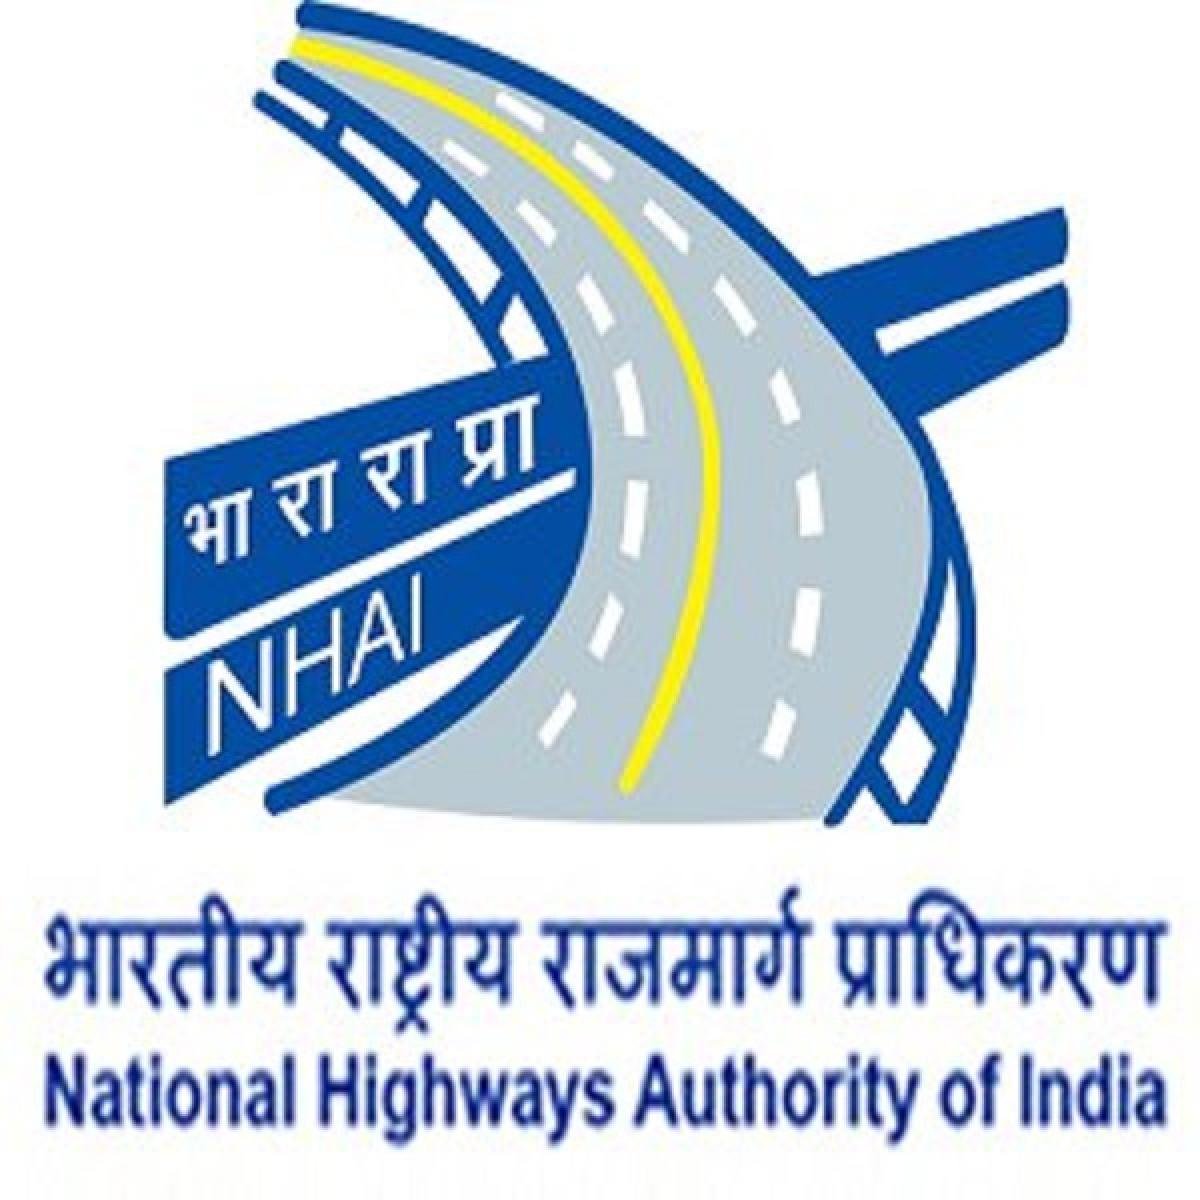 NHAI Constructs 25 Km Road In 18 Hours, Sets World Record